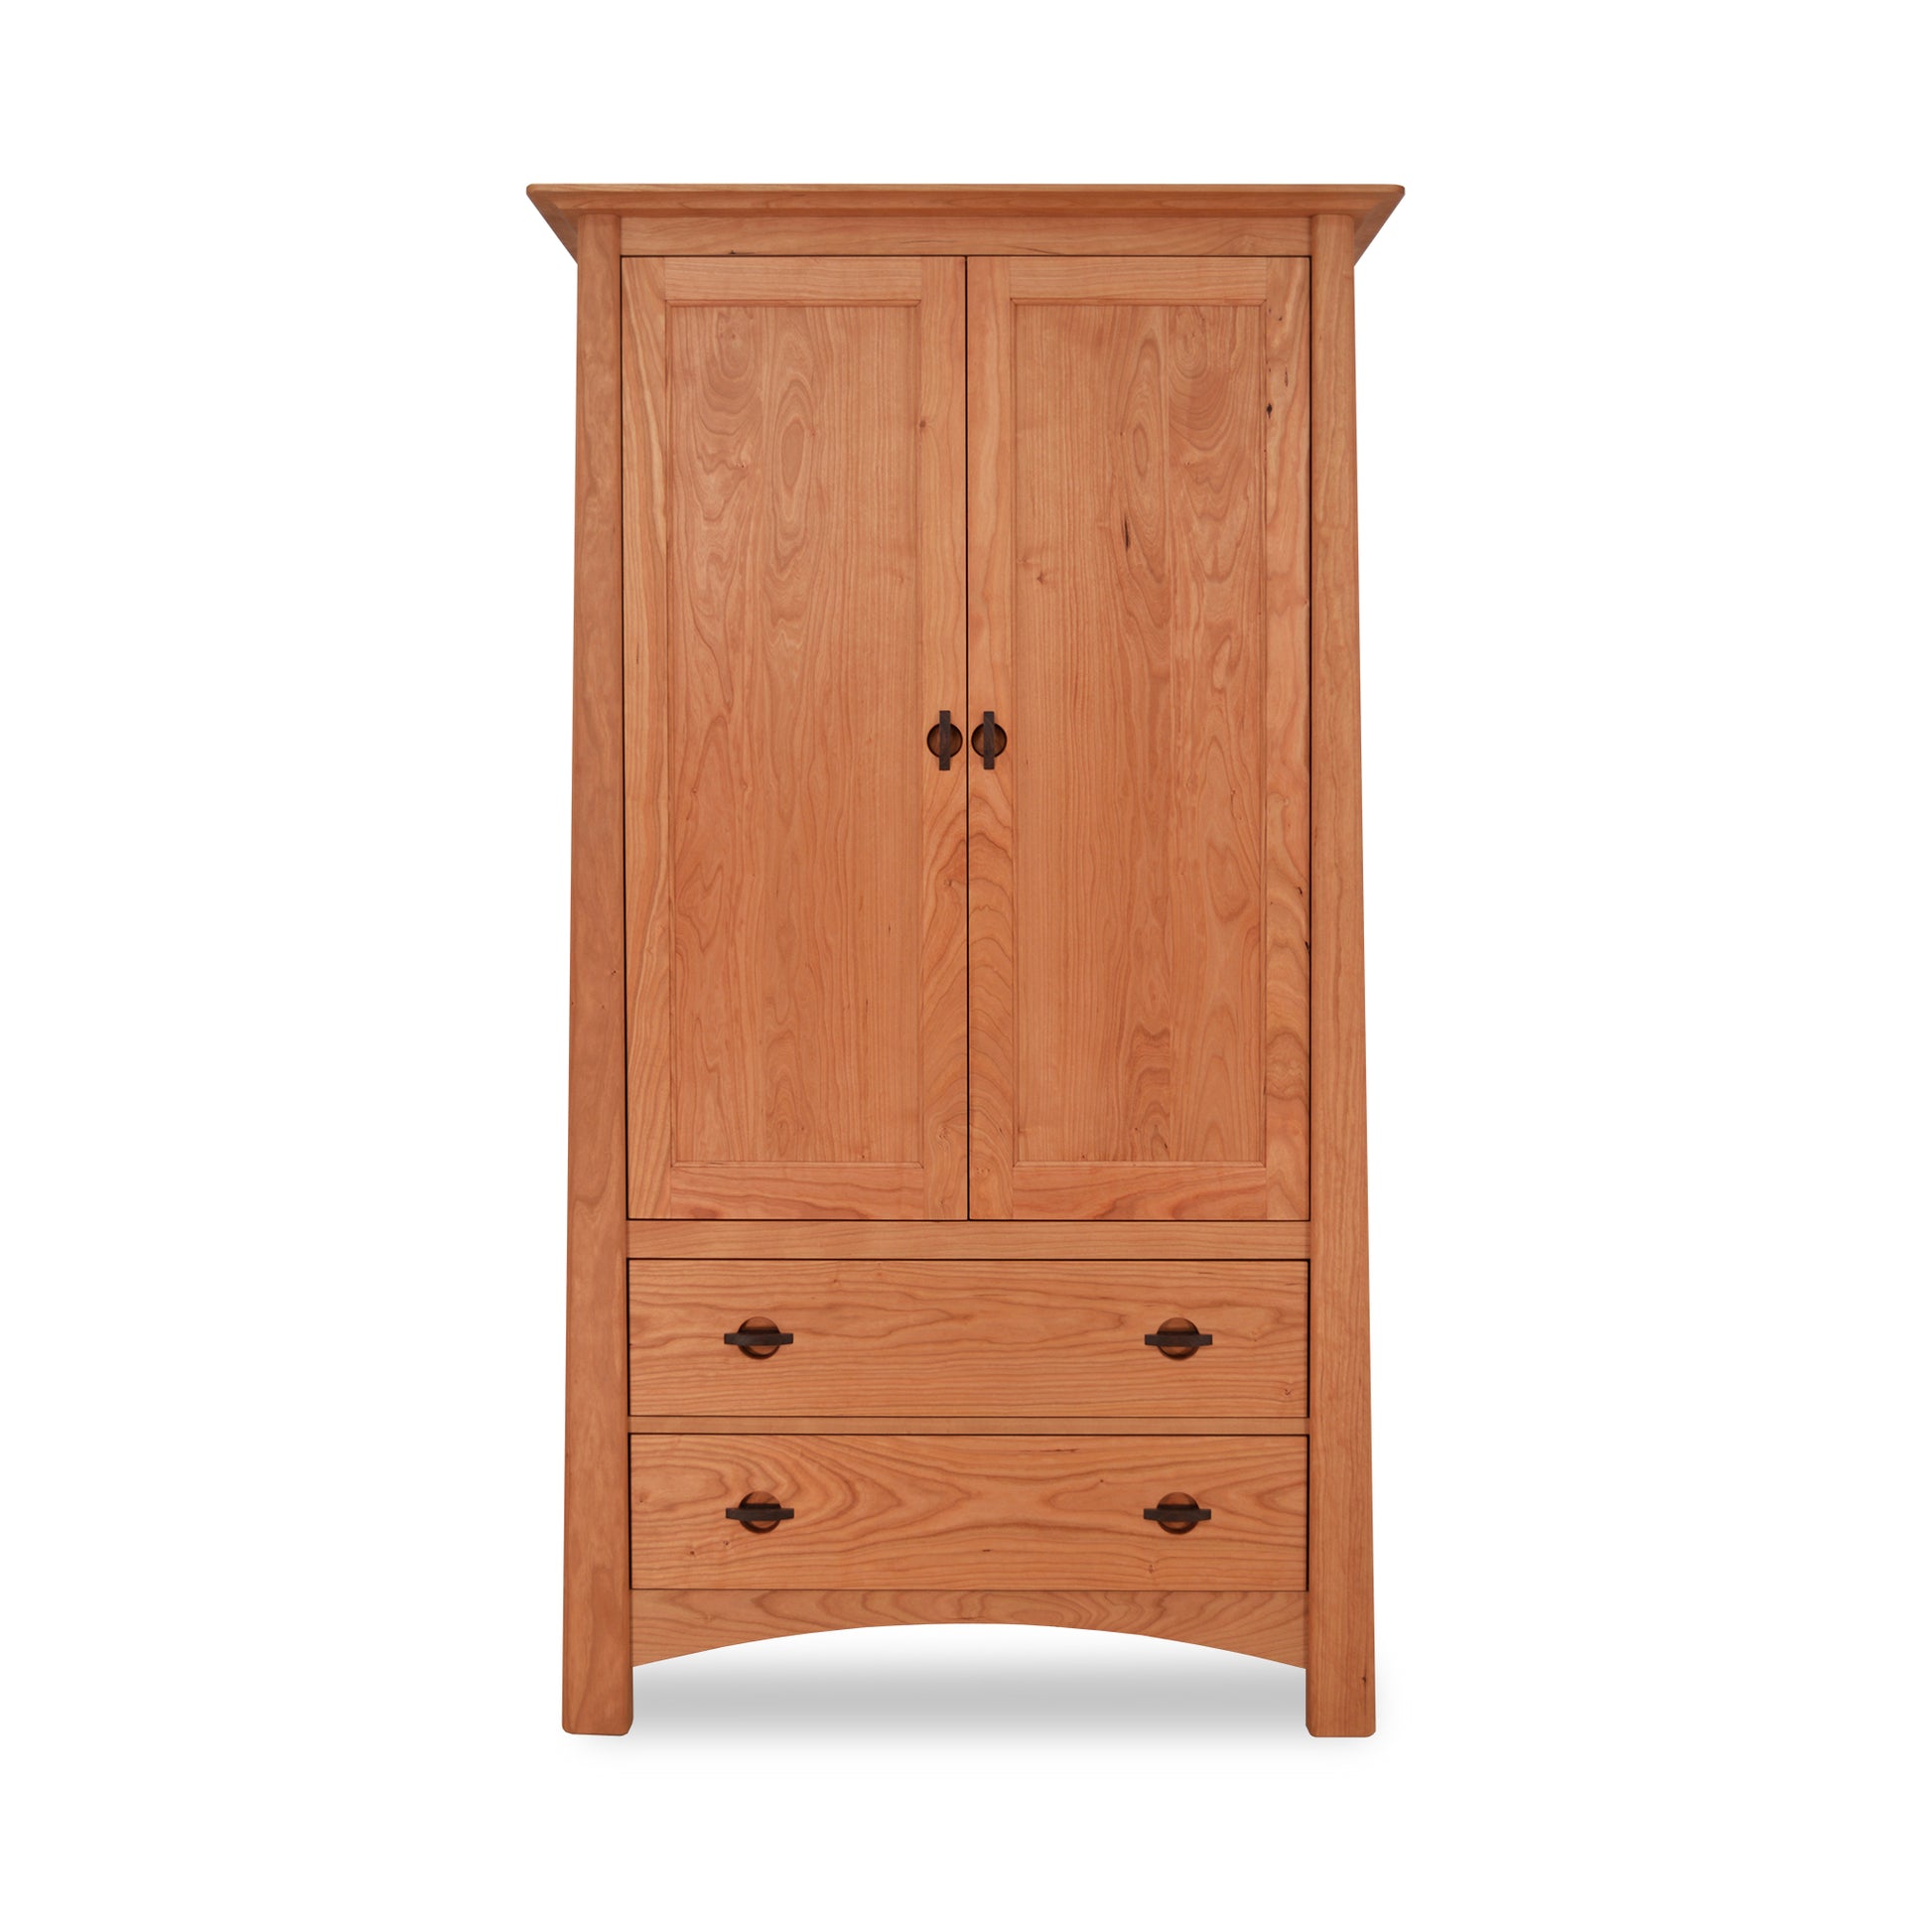 A high-end handcrafted Maple Corner Woodworks Cherry Moon Armoire with two drawers and two doors.